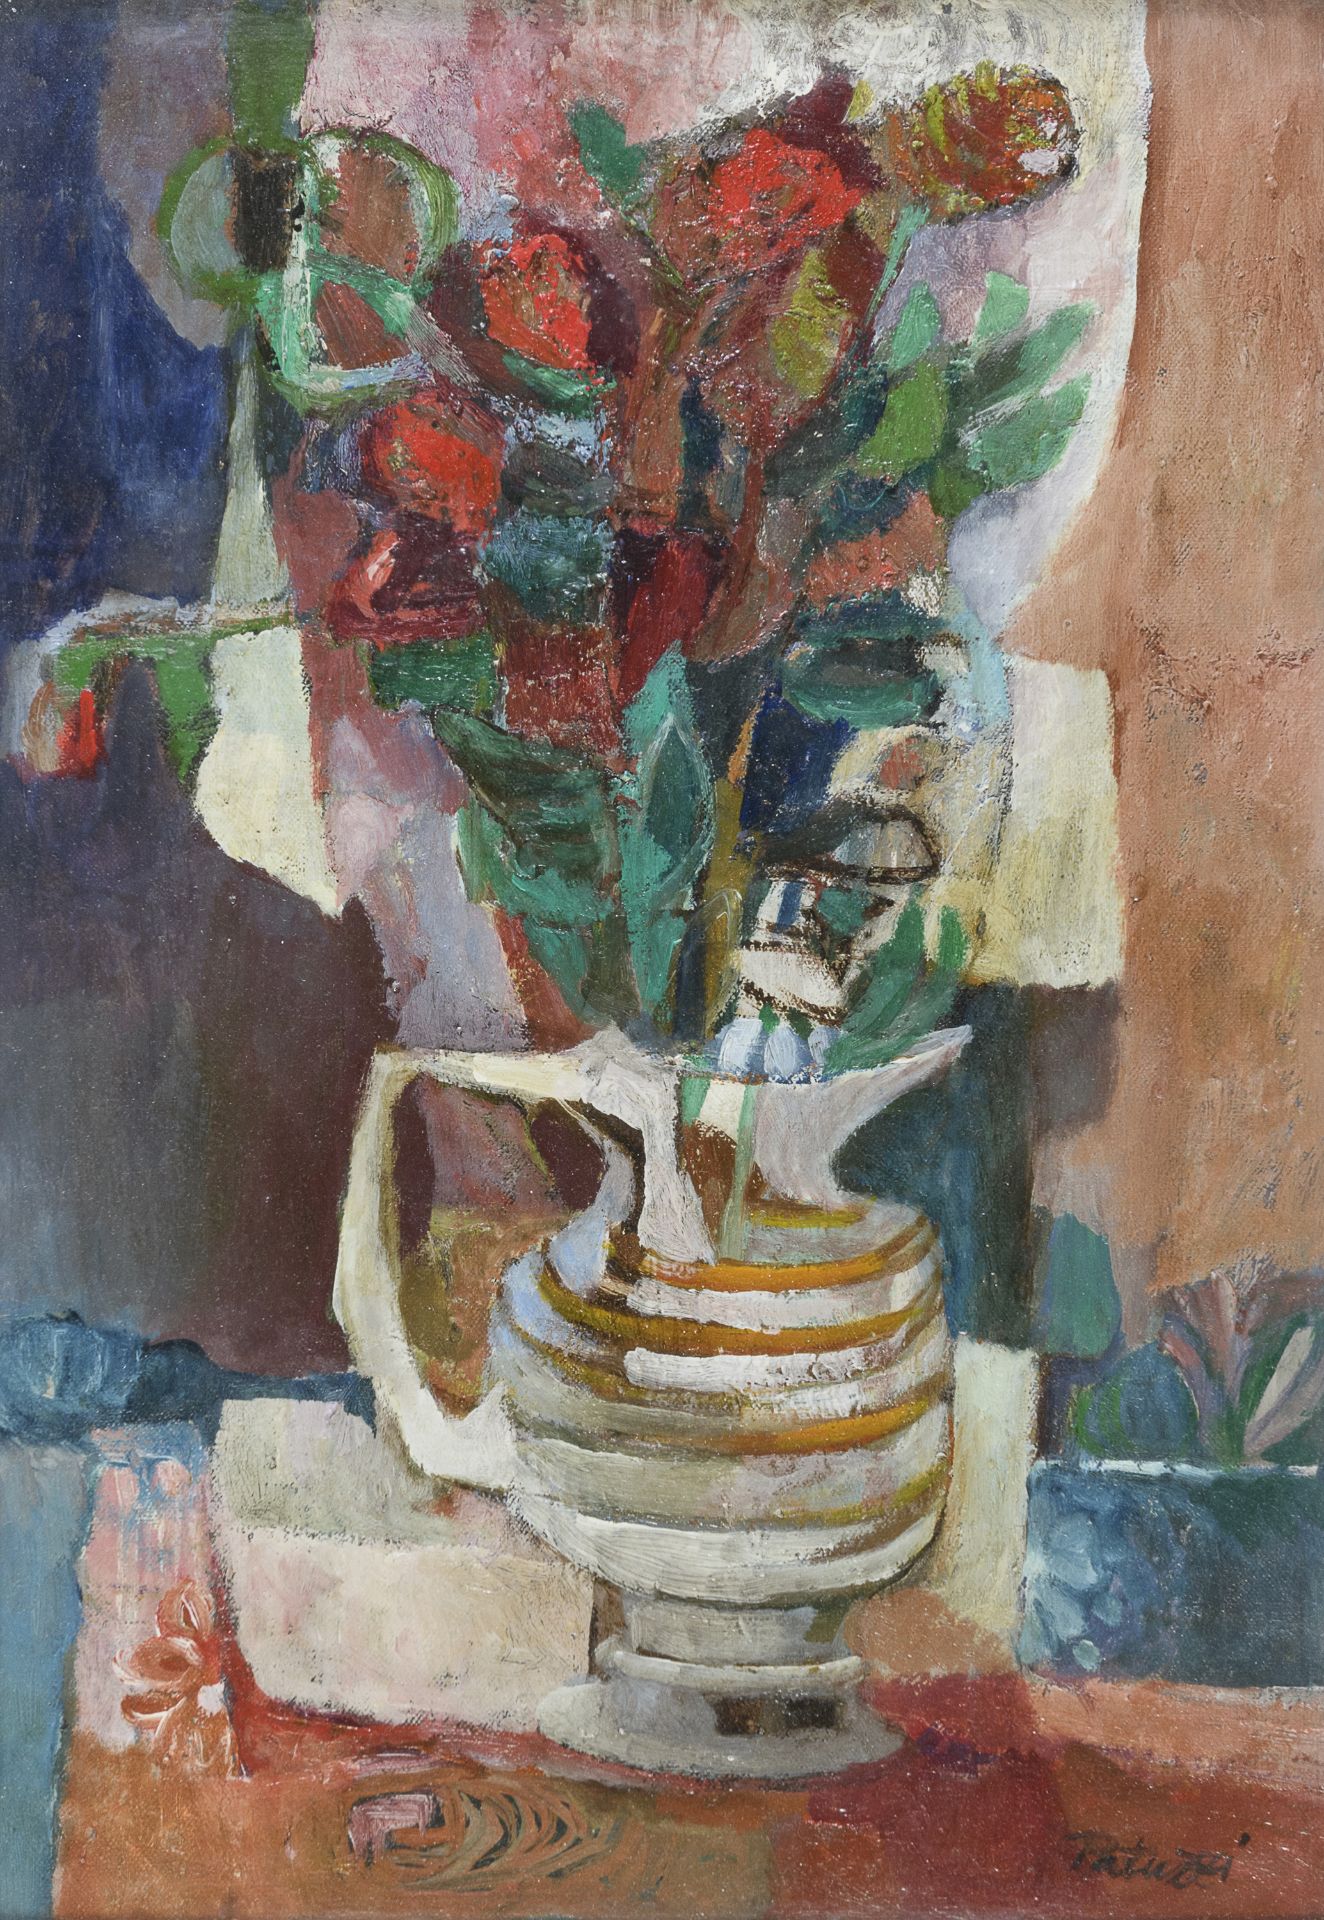 OIL PAINTING OF RED ROSES BY FRANCO PATUZZI 1968